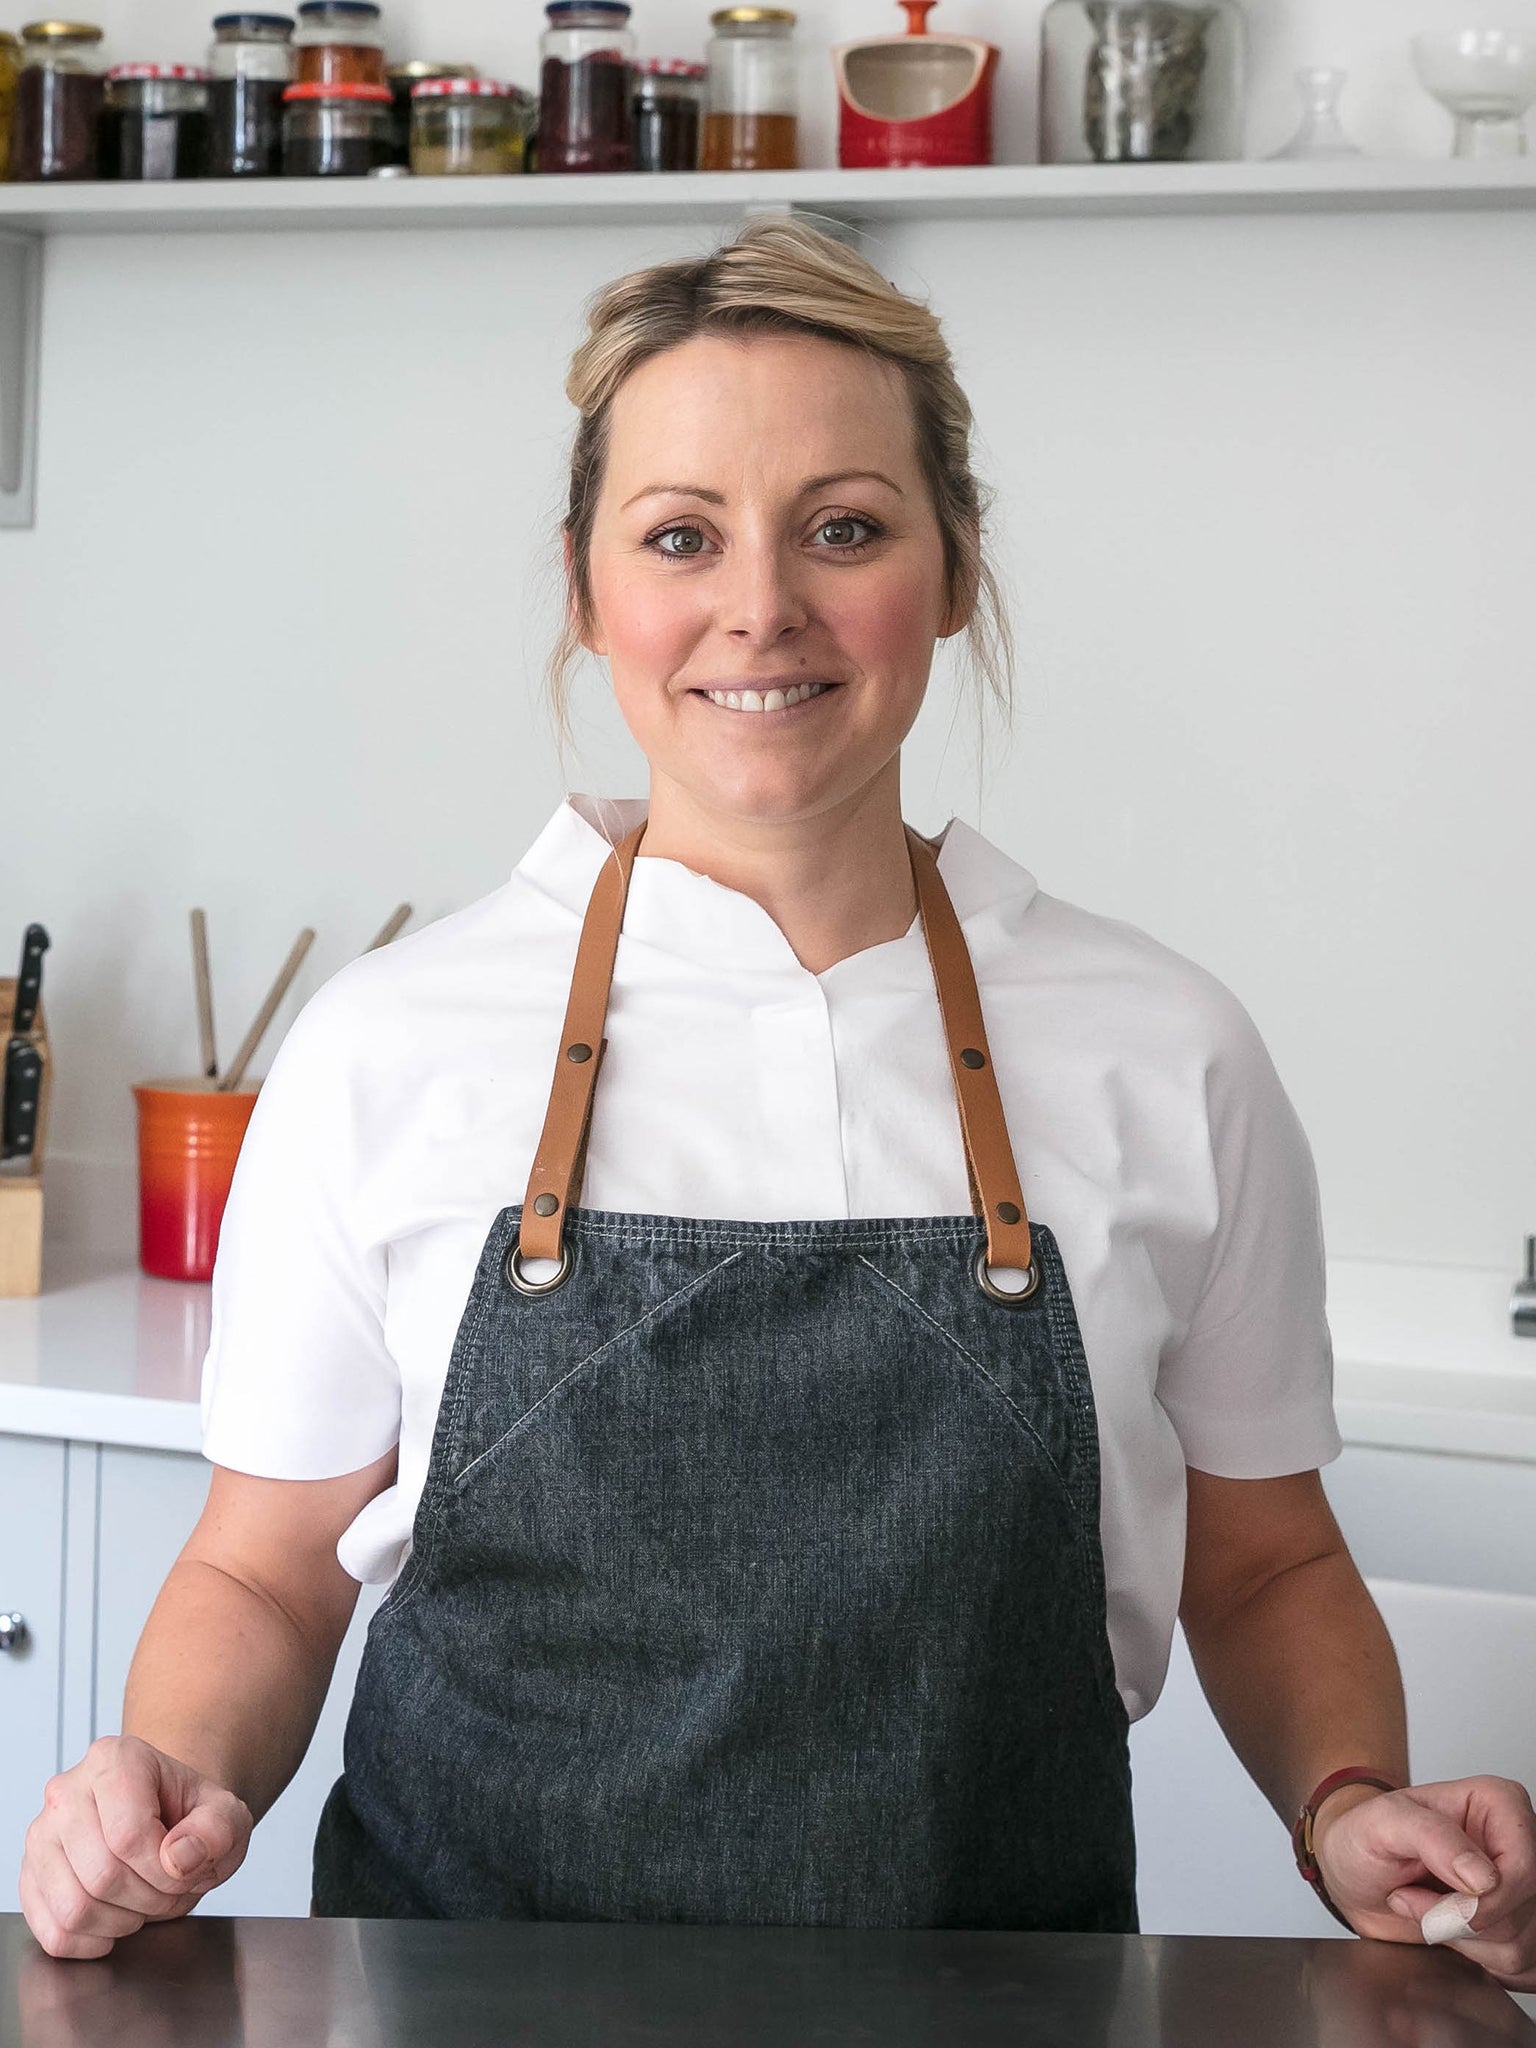 Anna Haugh is the chef-owner of Myrtle restaurant in London